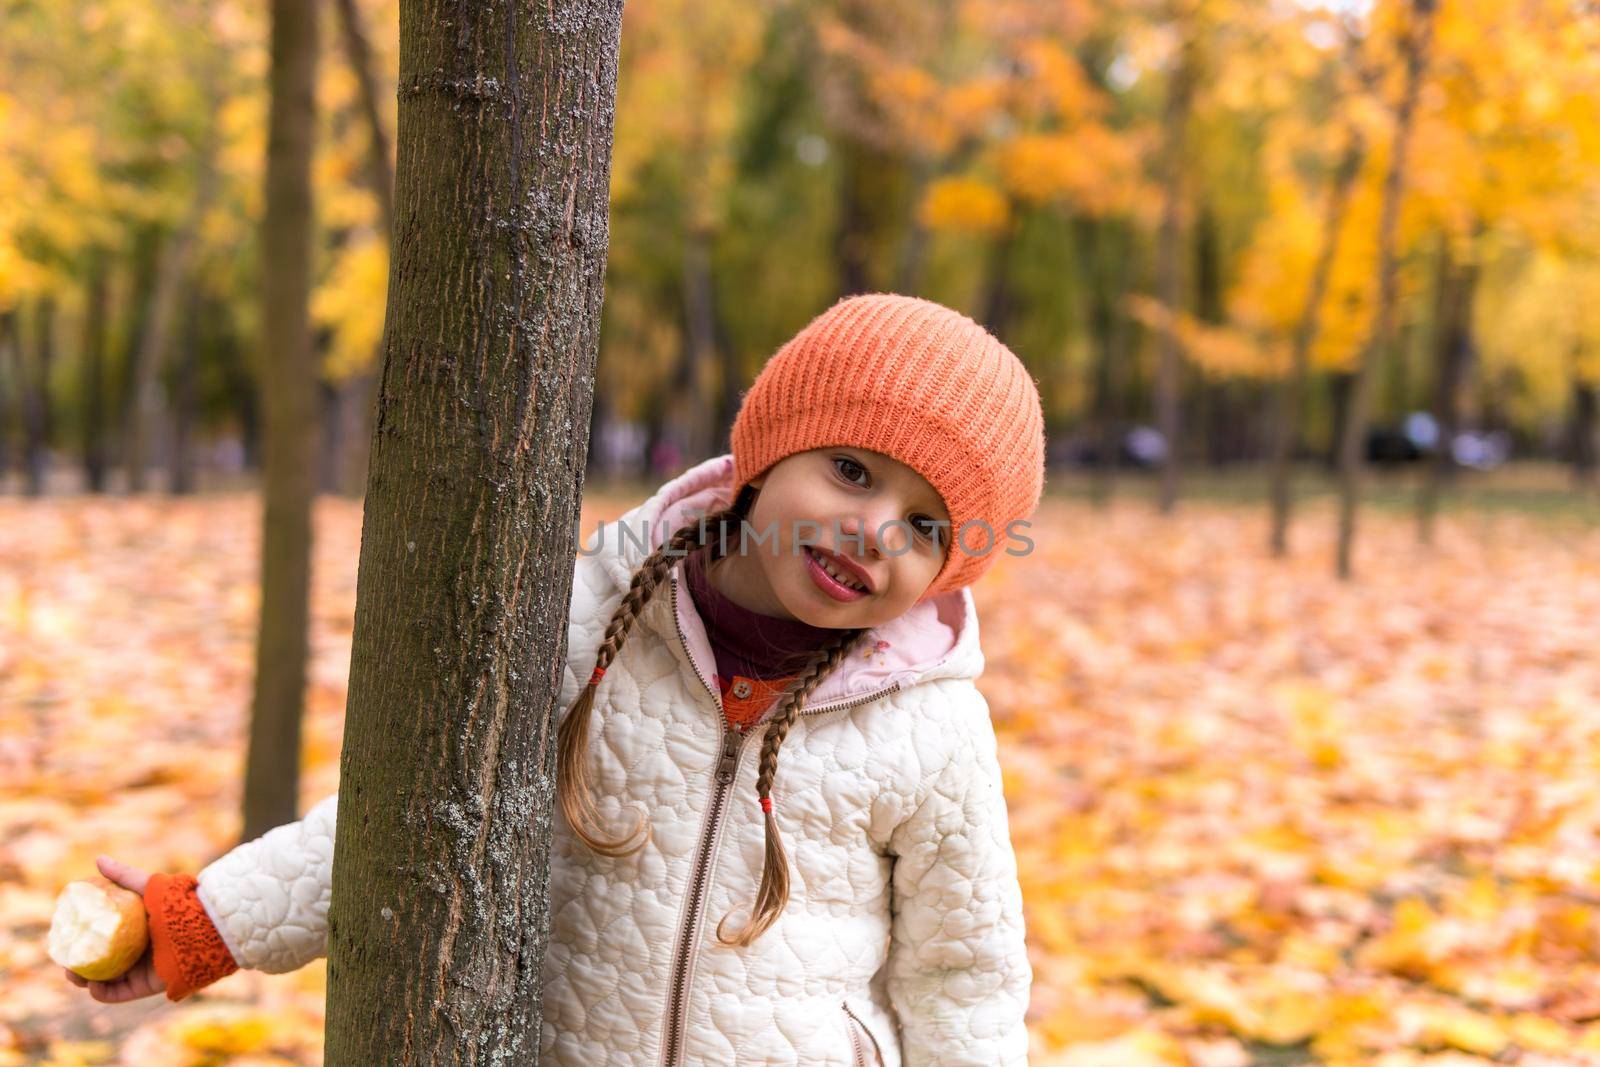 One happy funny child kid Girl orande Hat walking in park forest enjoying autumn fall nature weather. siblings Kid Collect falling leaves in baskets, playing hiding tree play hide and seek together by mytrykau